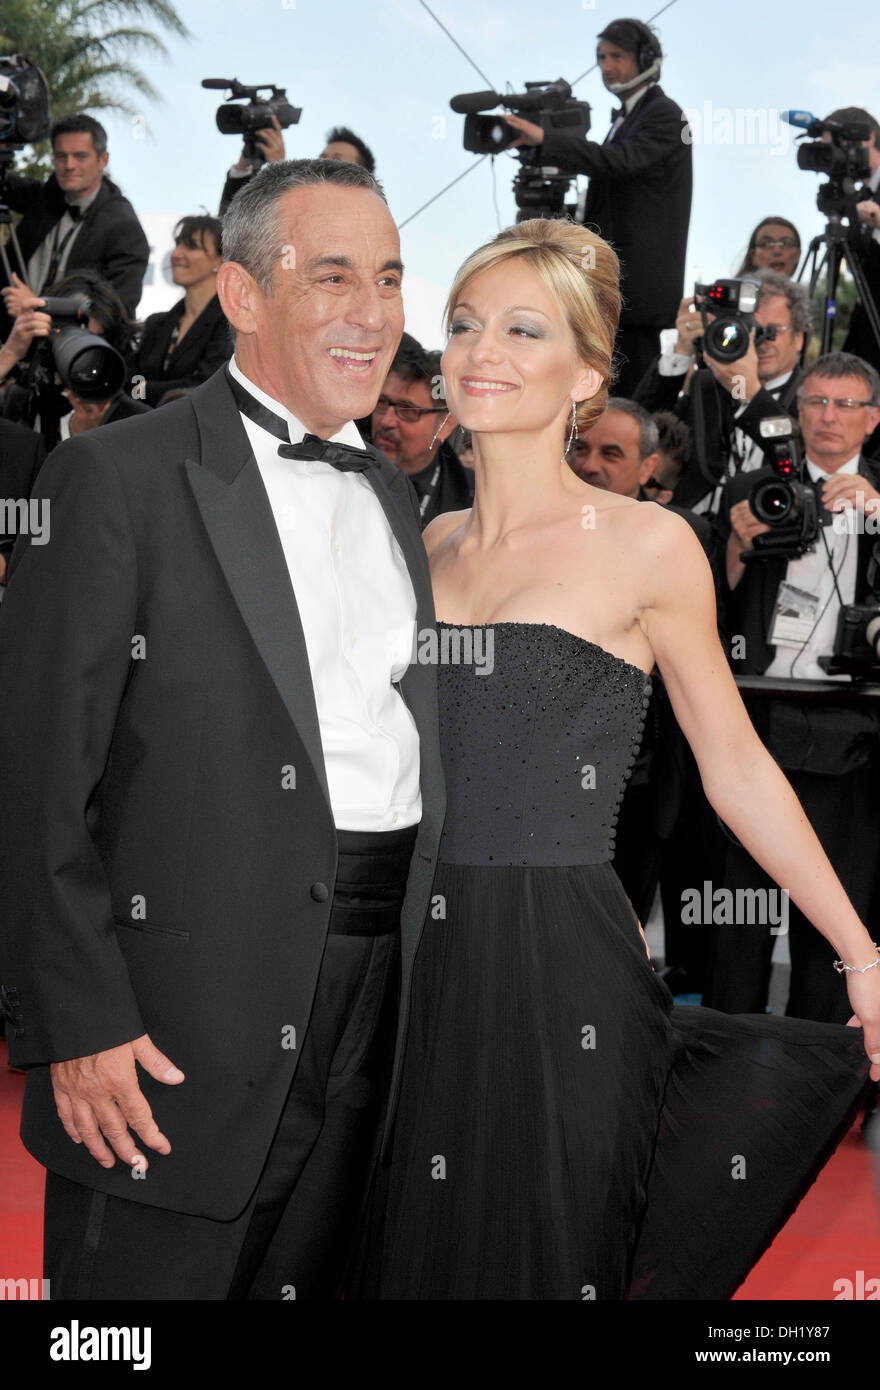 Cannes International Film Festival 2012: Thierry Ardisson and Audrey Crespo-Mara posing during a photocall on 2012.05.19 Stock Photo